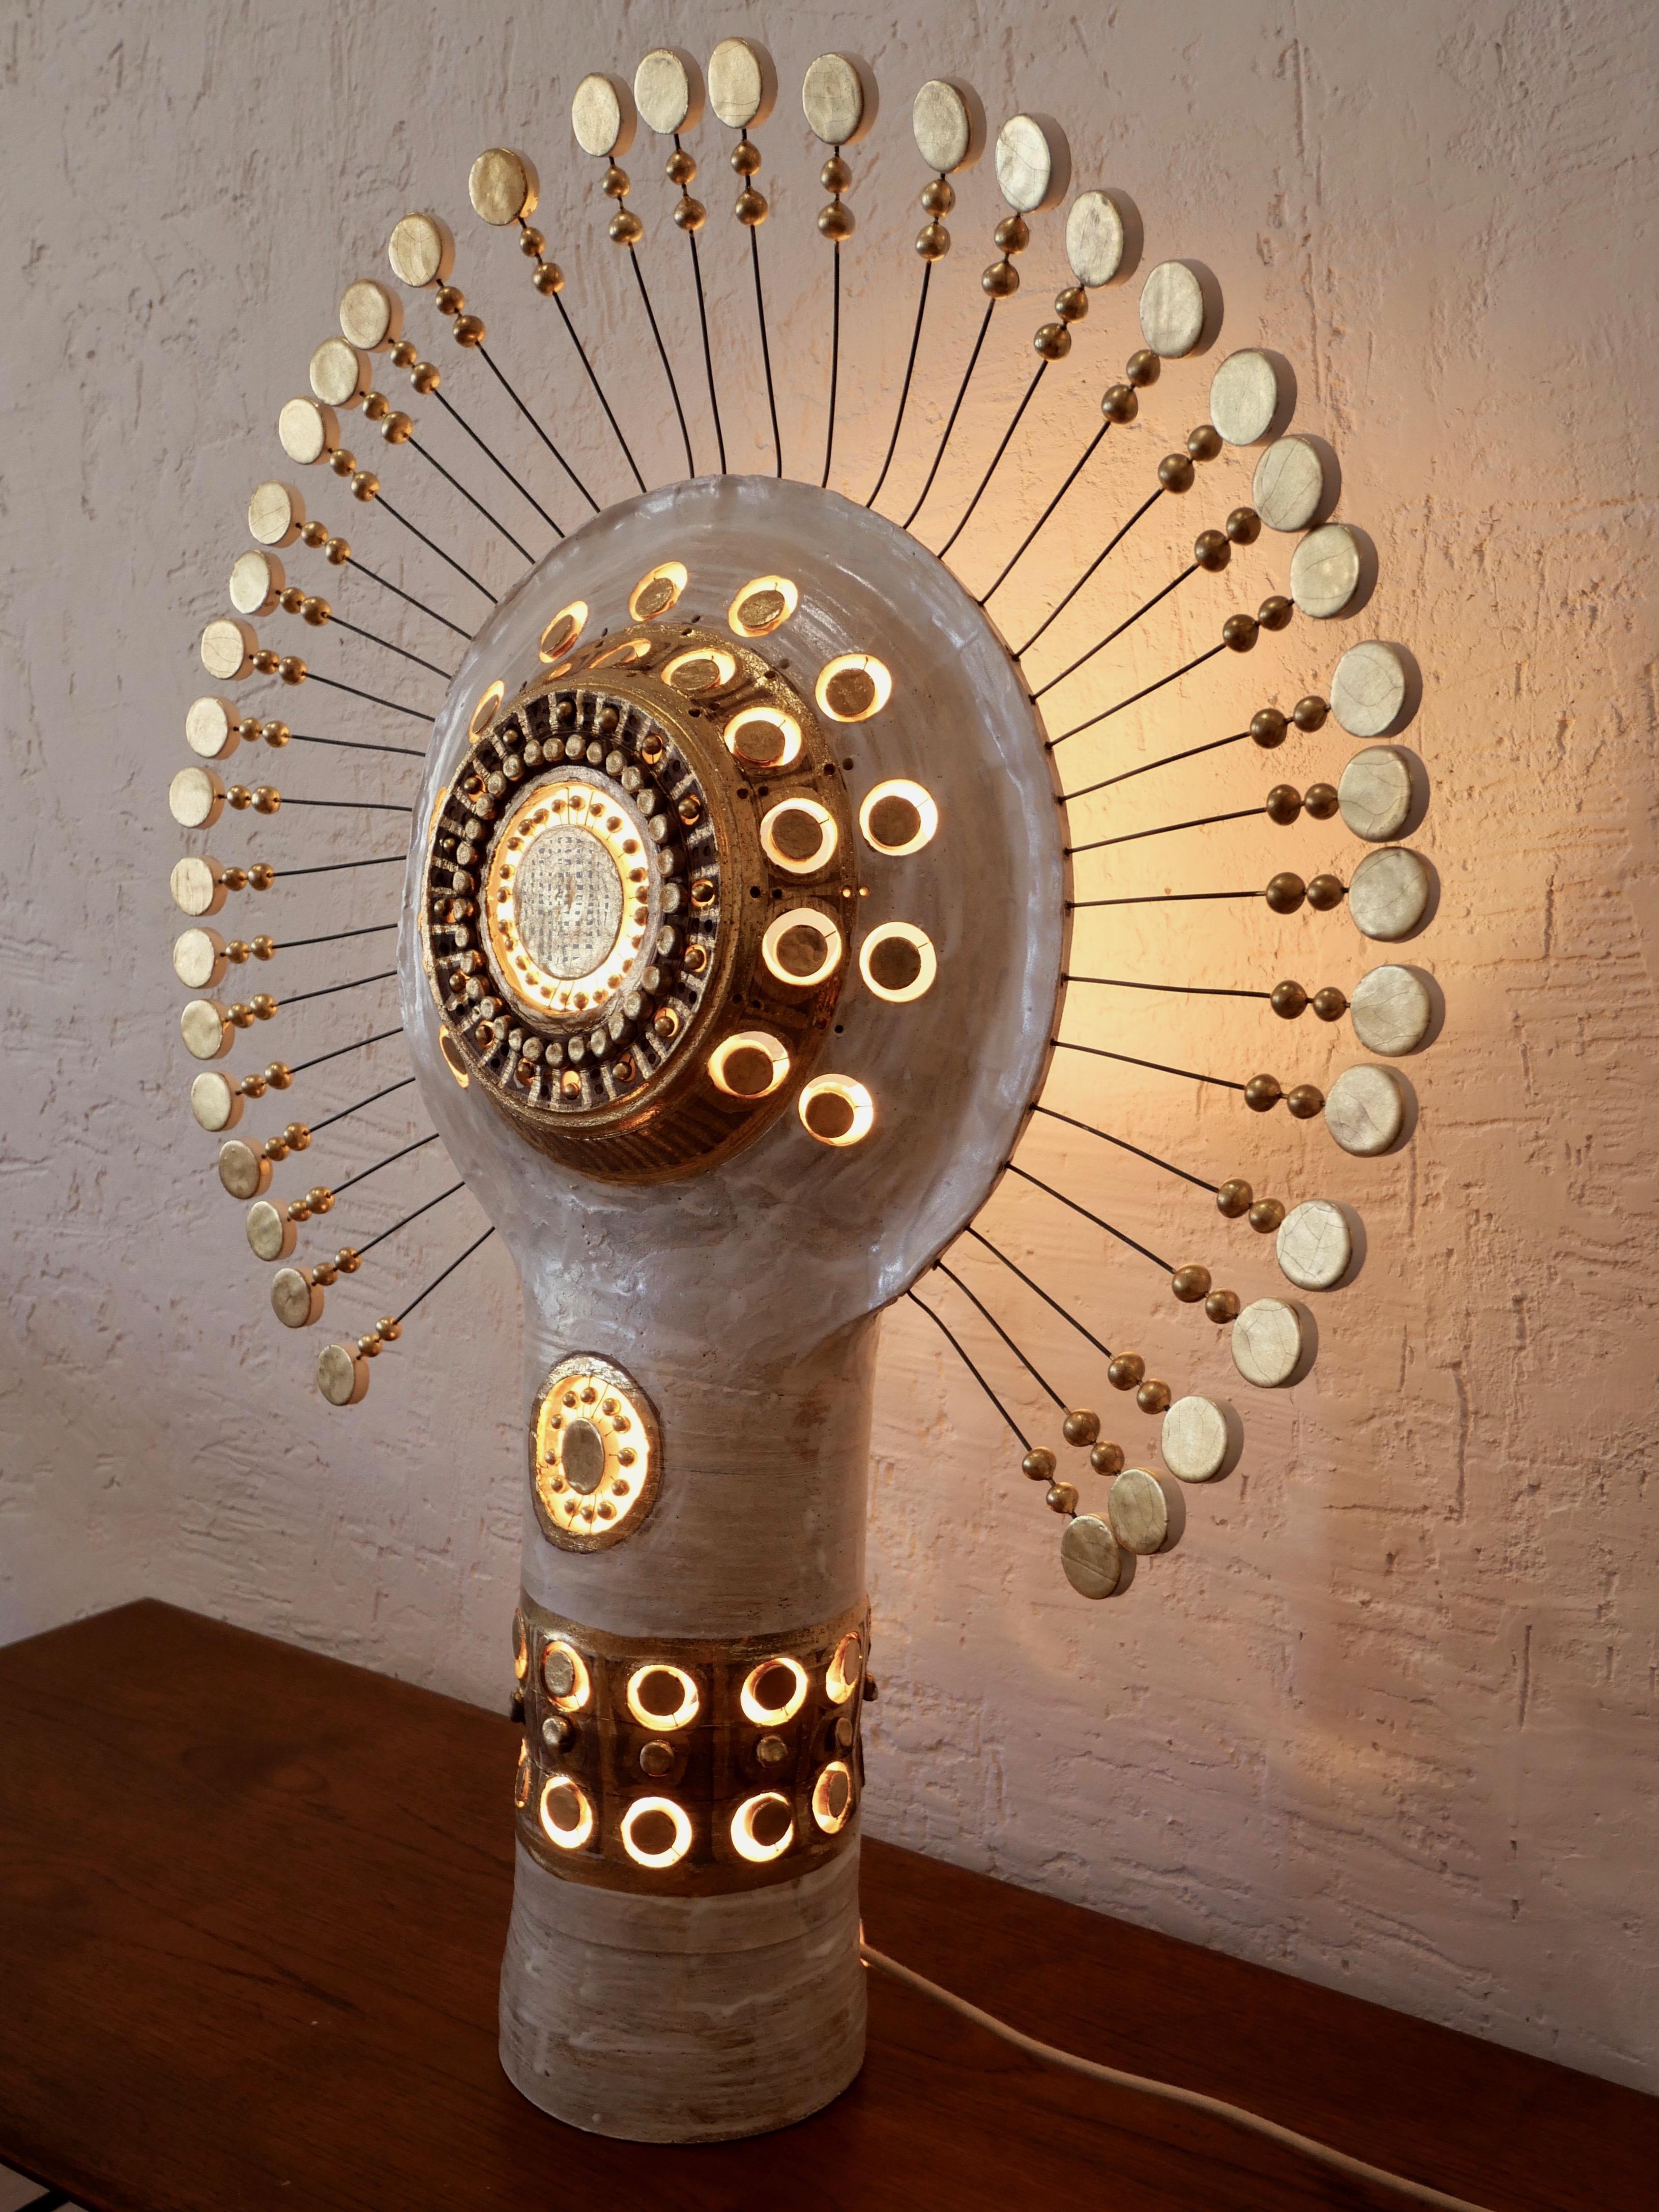 Contemporary Georges Pelletier Sun Lamp in White Gold and Tan Enameled Ceramic, 2020